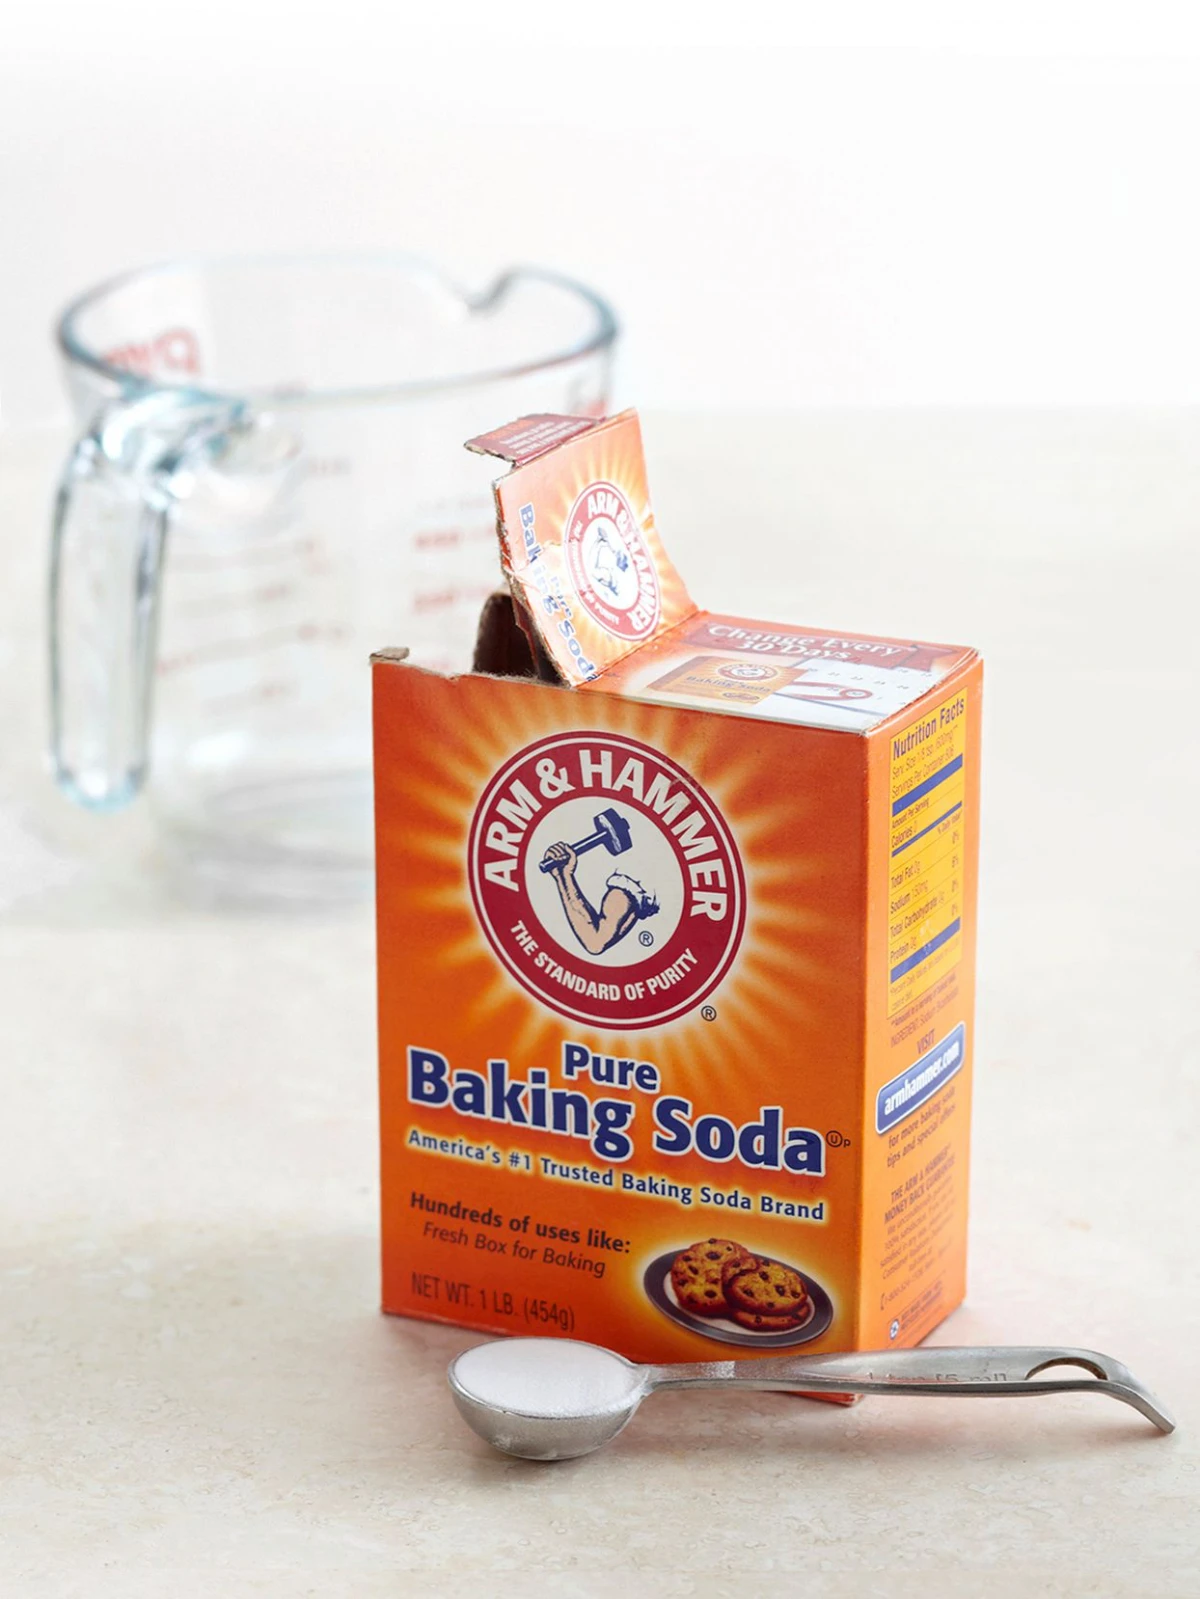 how to get rid of black mold baking soda